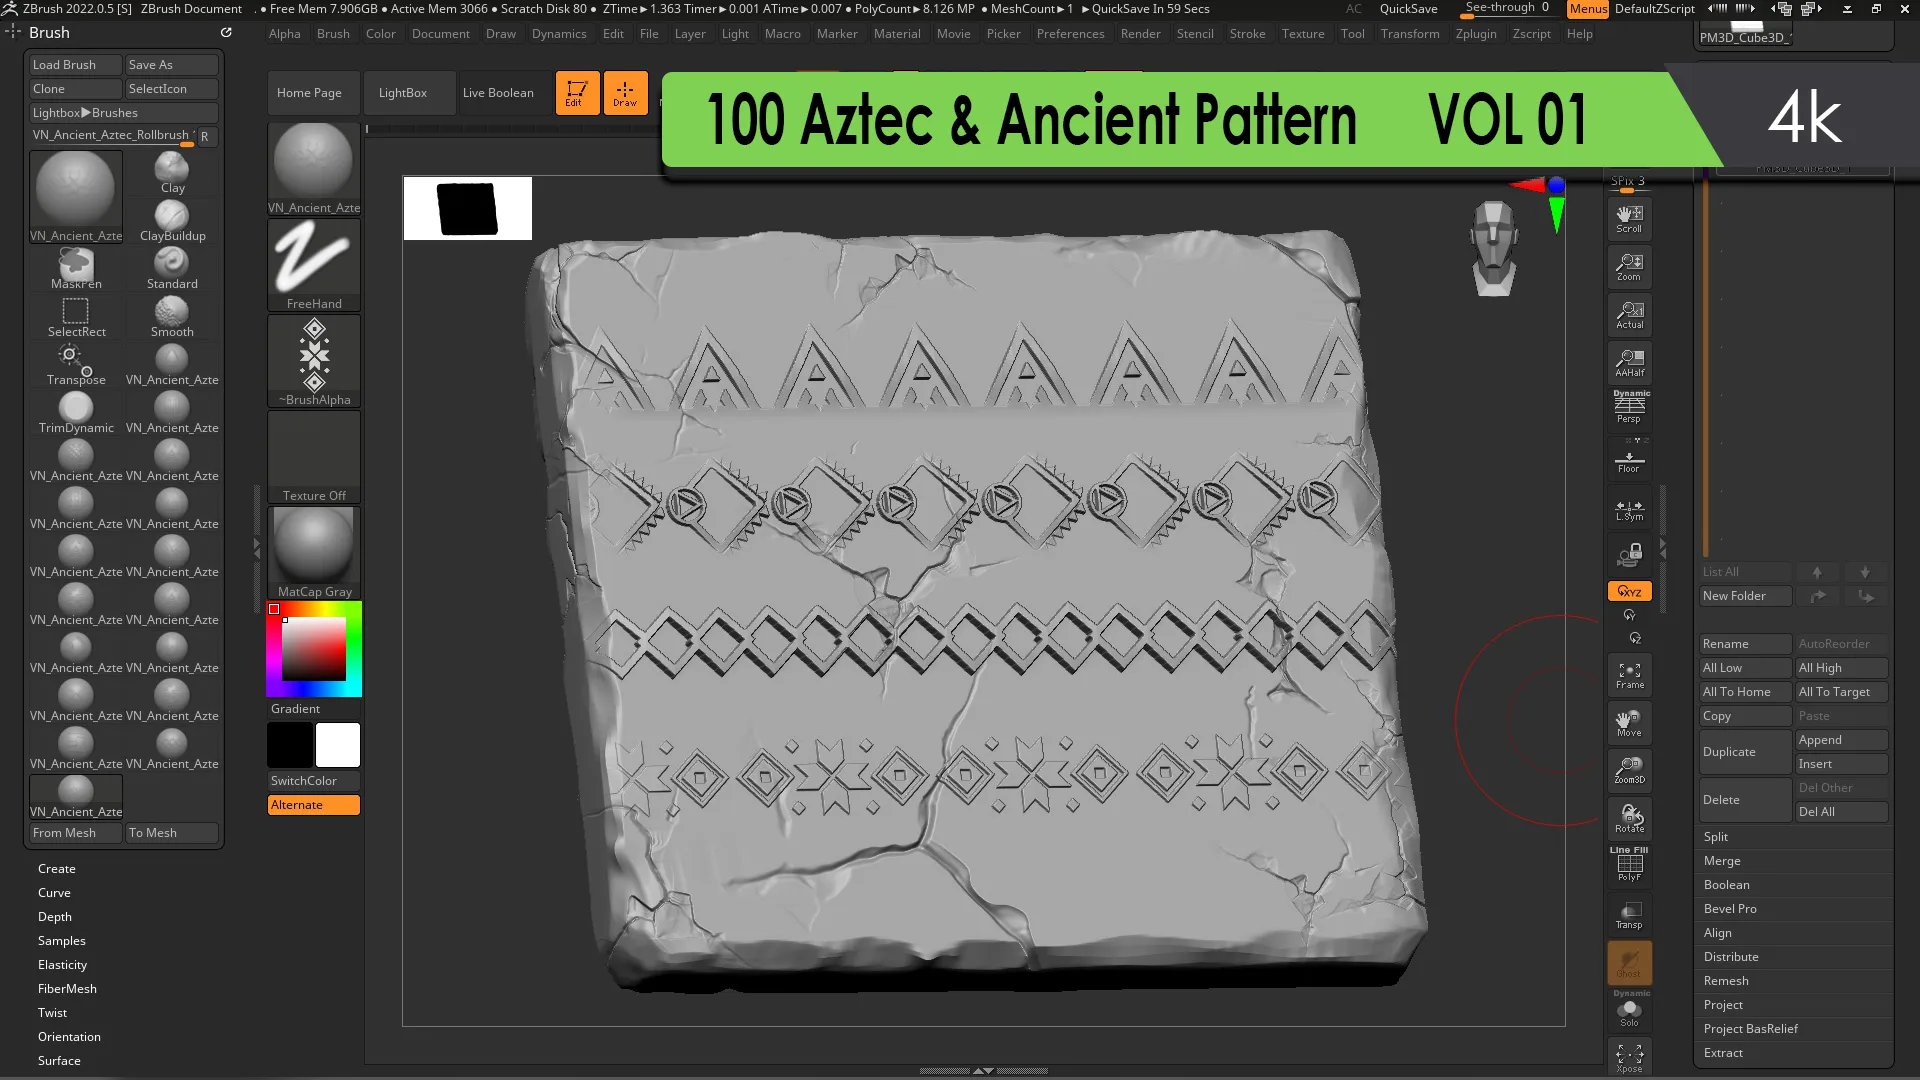 100 Aztec Border Pattern and Roll Brush